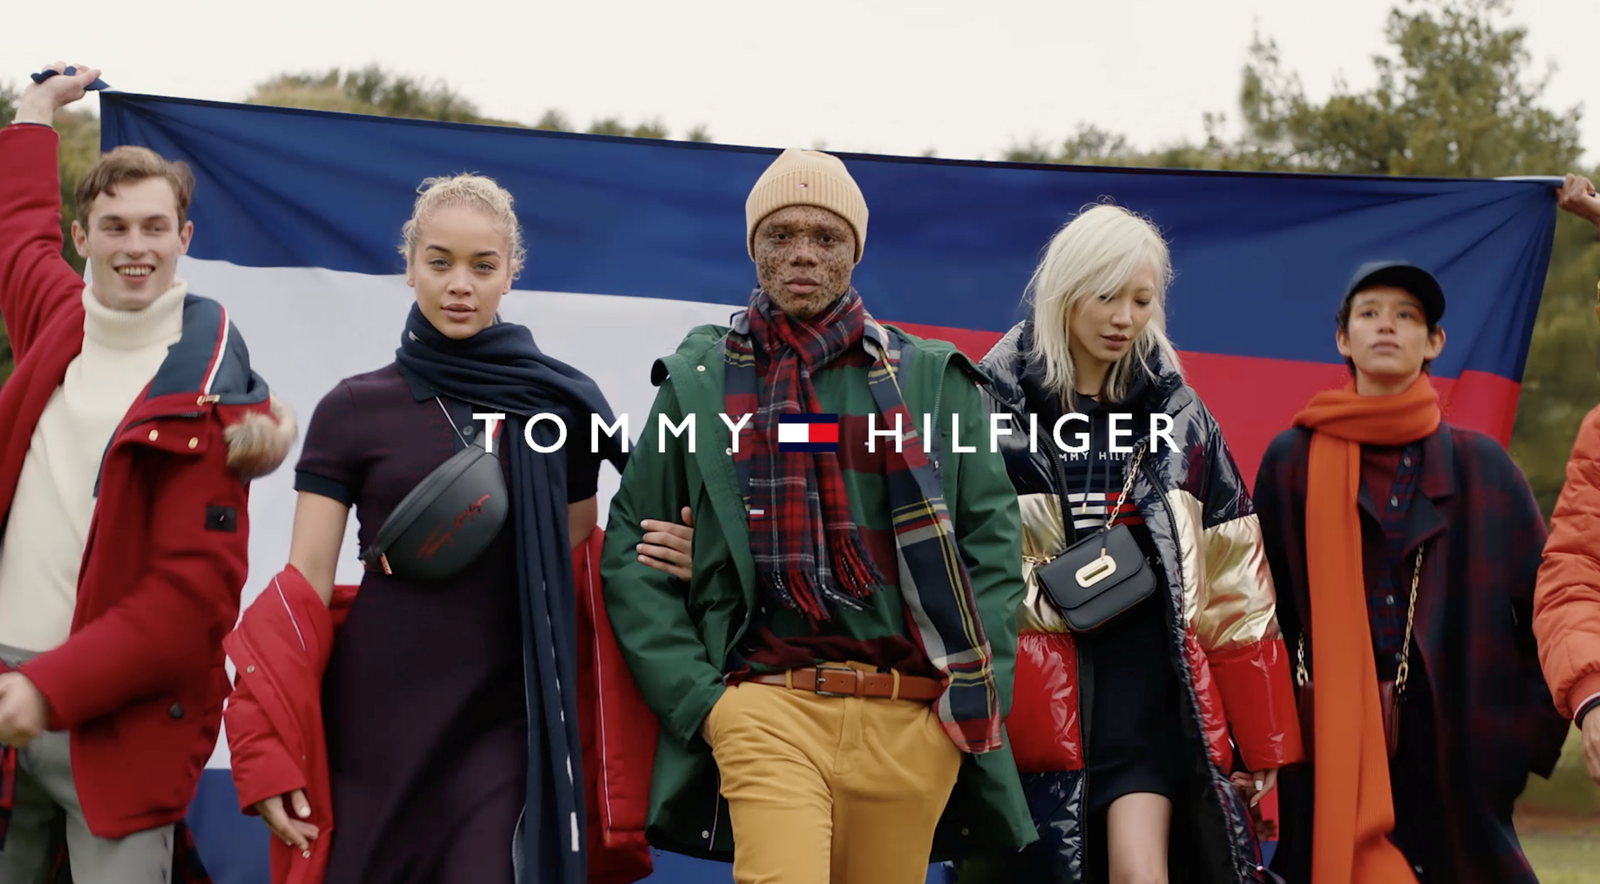 SWOT analysis of Tommy Hilfiger